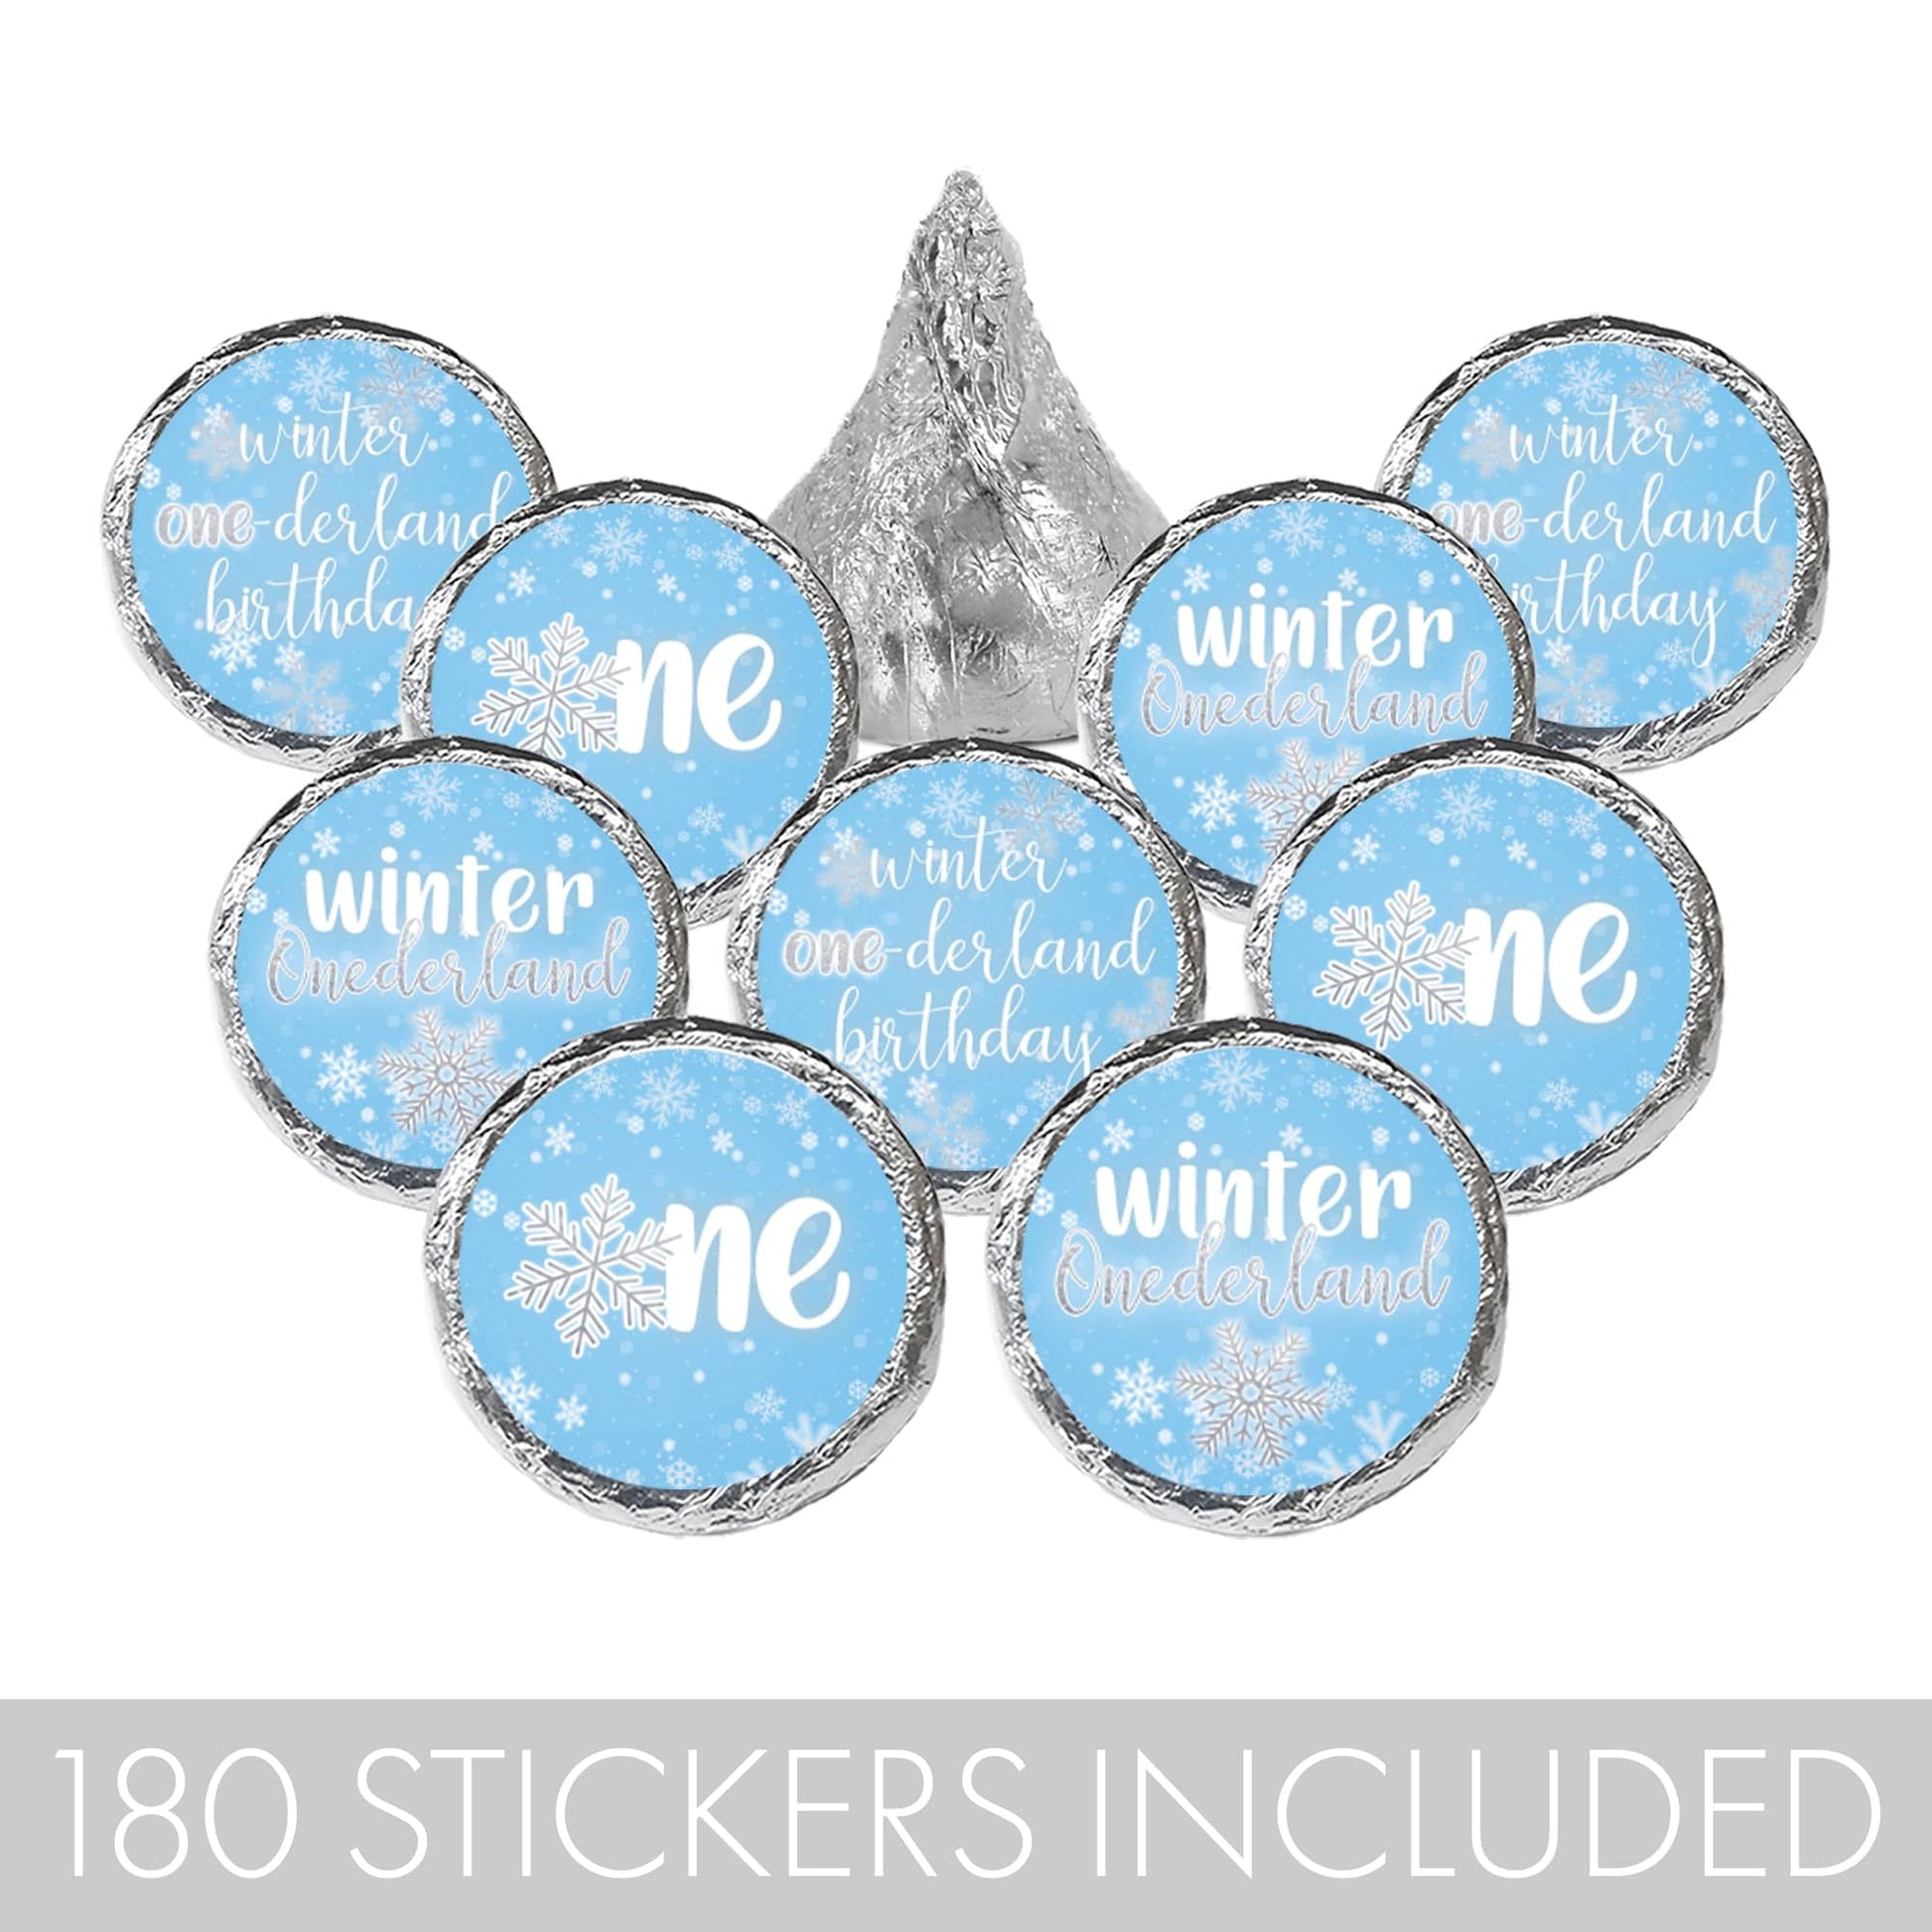  Make your 1st birthday a winter wonderland with these Onederland Snowflake stickers